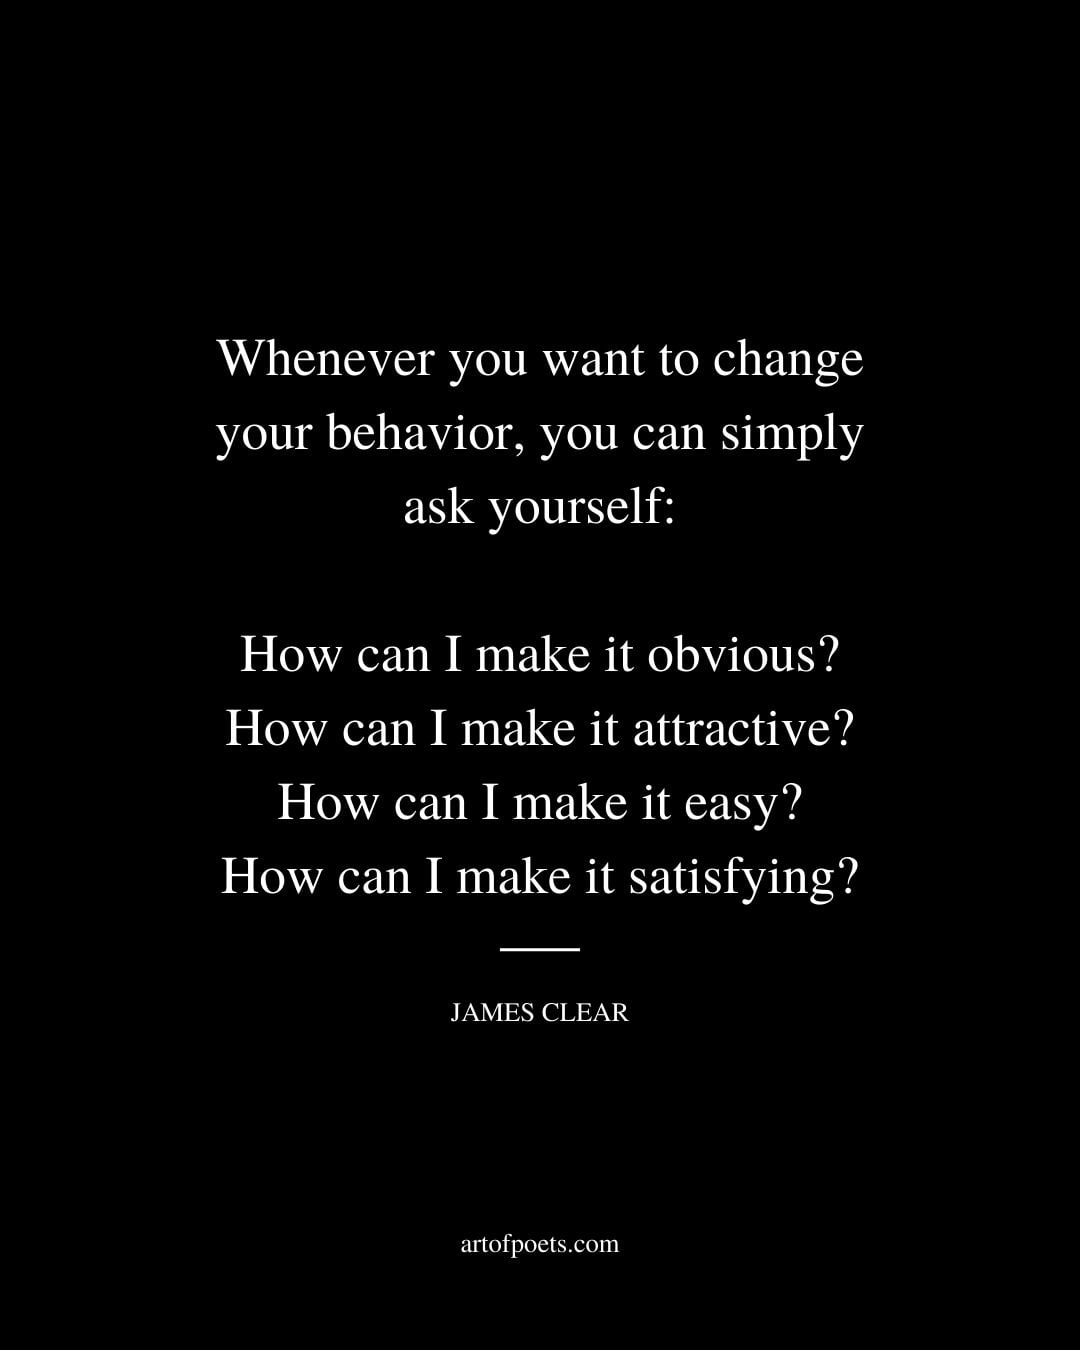 Whenever you want to change your behavior you can simply ask yourself How can I make it obvious How can I make it attractive How can I make it easy How can I make it satisfying